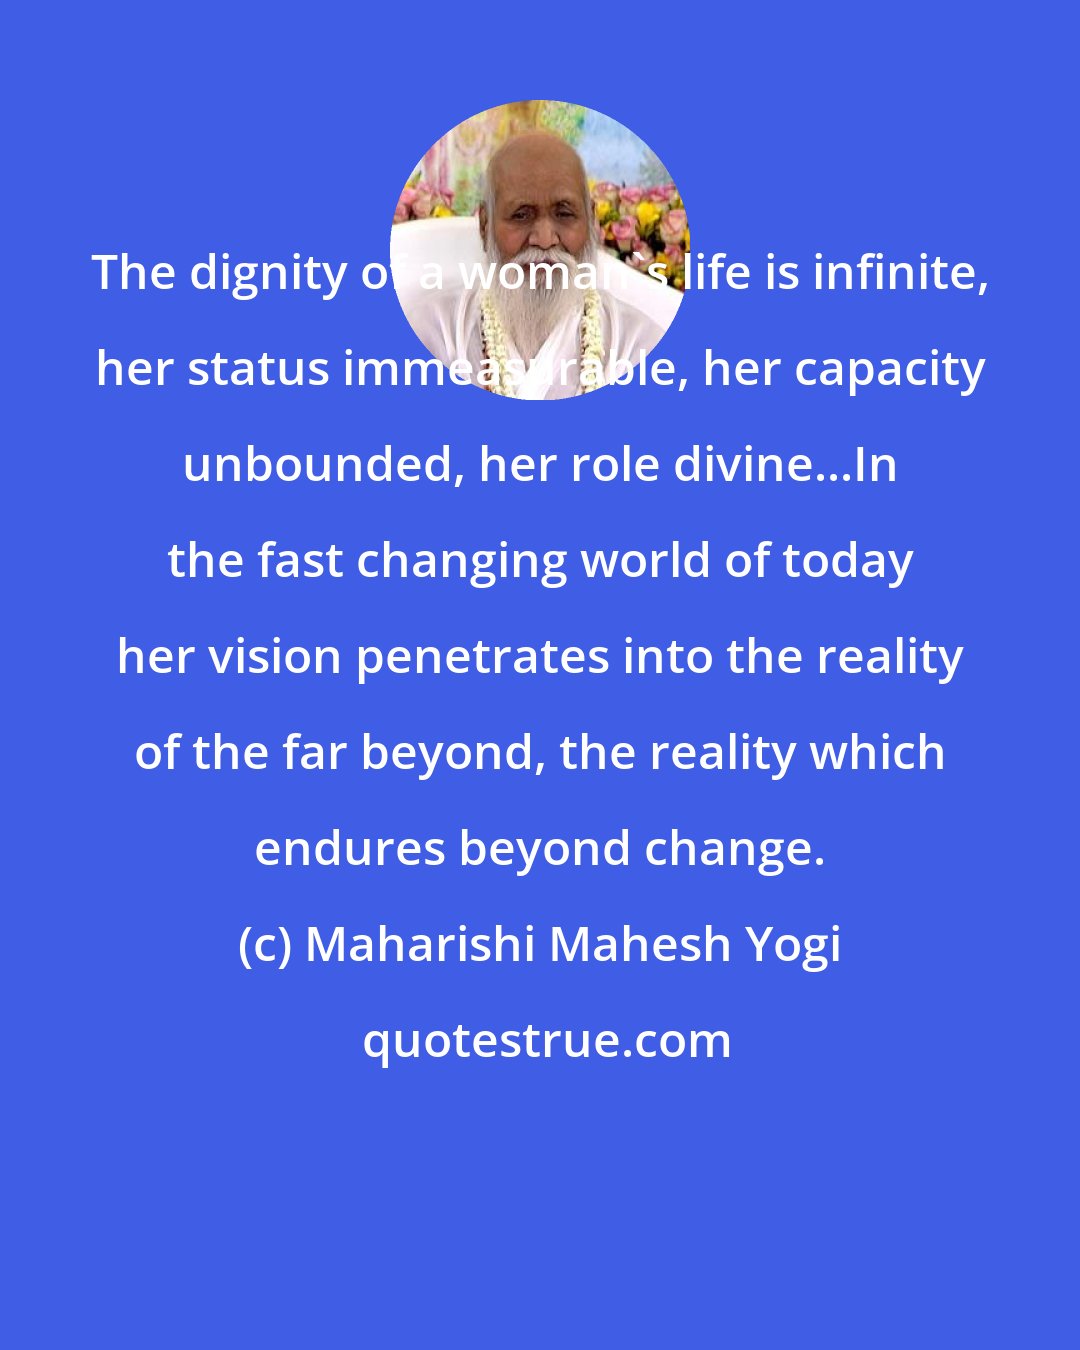 Maharishi Mahesh Yogi: The dignity of a woman's life is infinite, her status immeasurable, her capacity unbounded, her role divine...In the fast changing world of today her vision penetrates into the reality of the far beyond, the reality which endures beyond change.